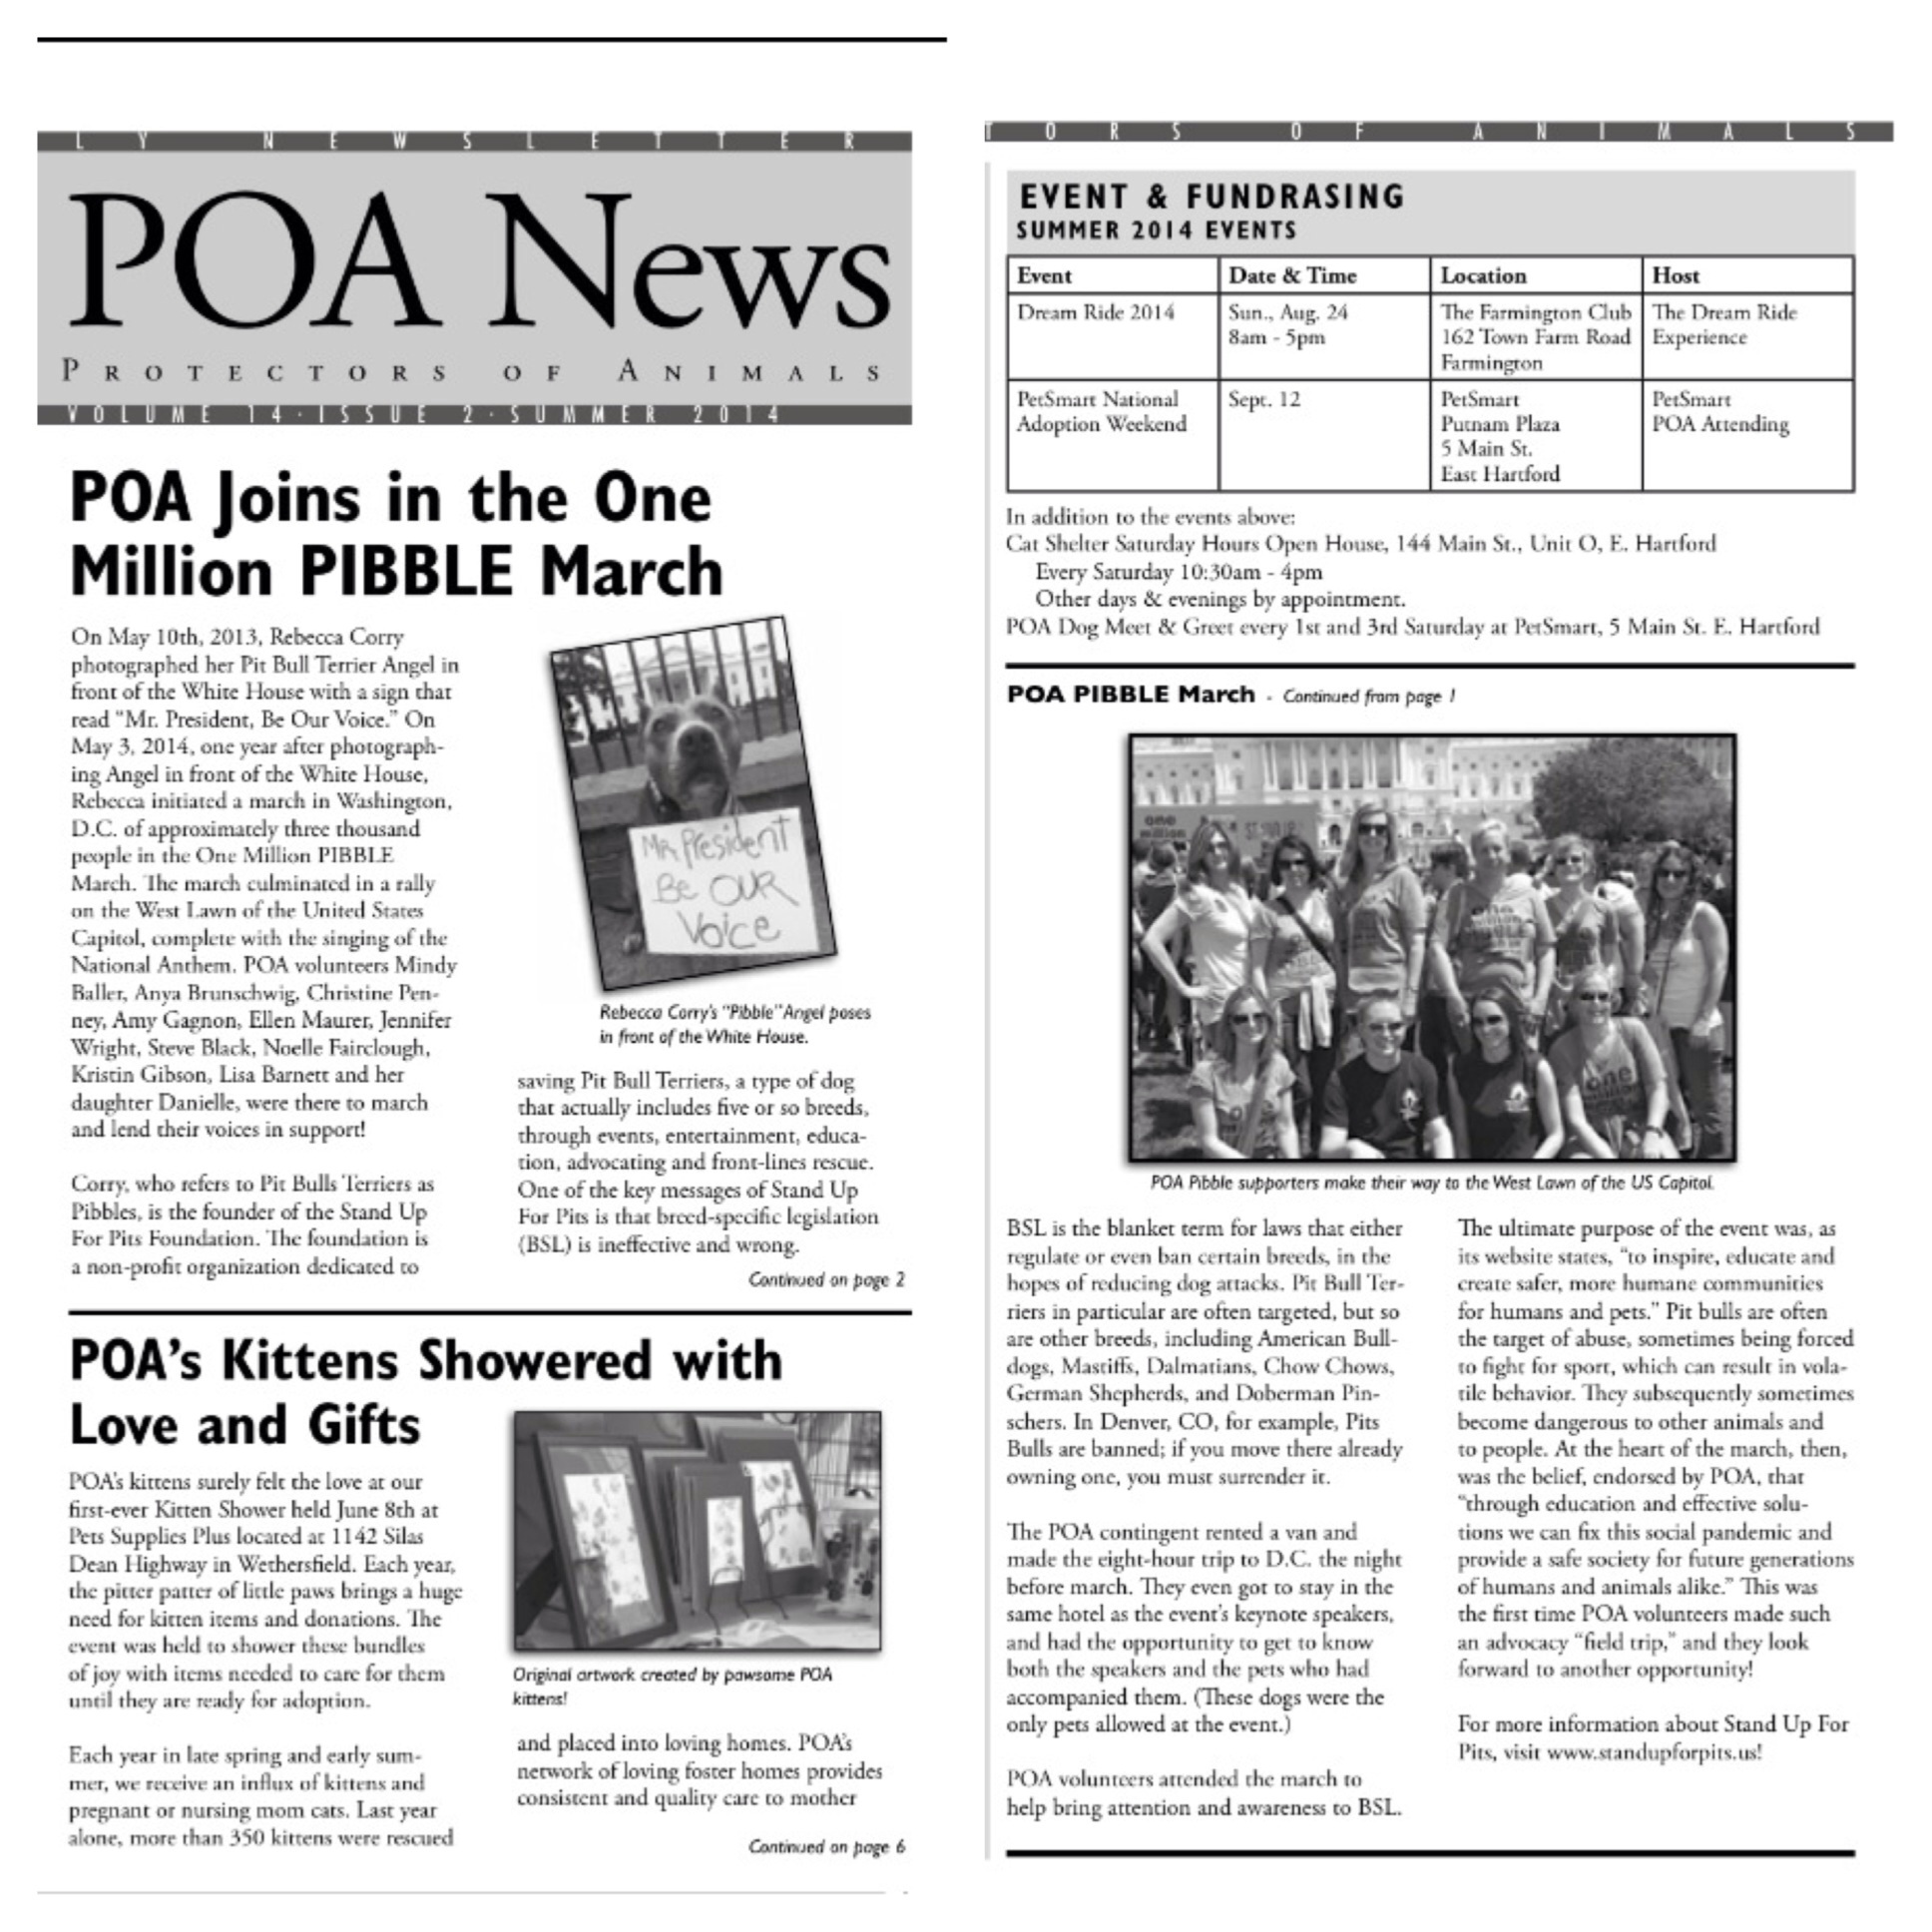 New press from POA about PIBBLE March!